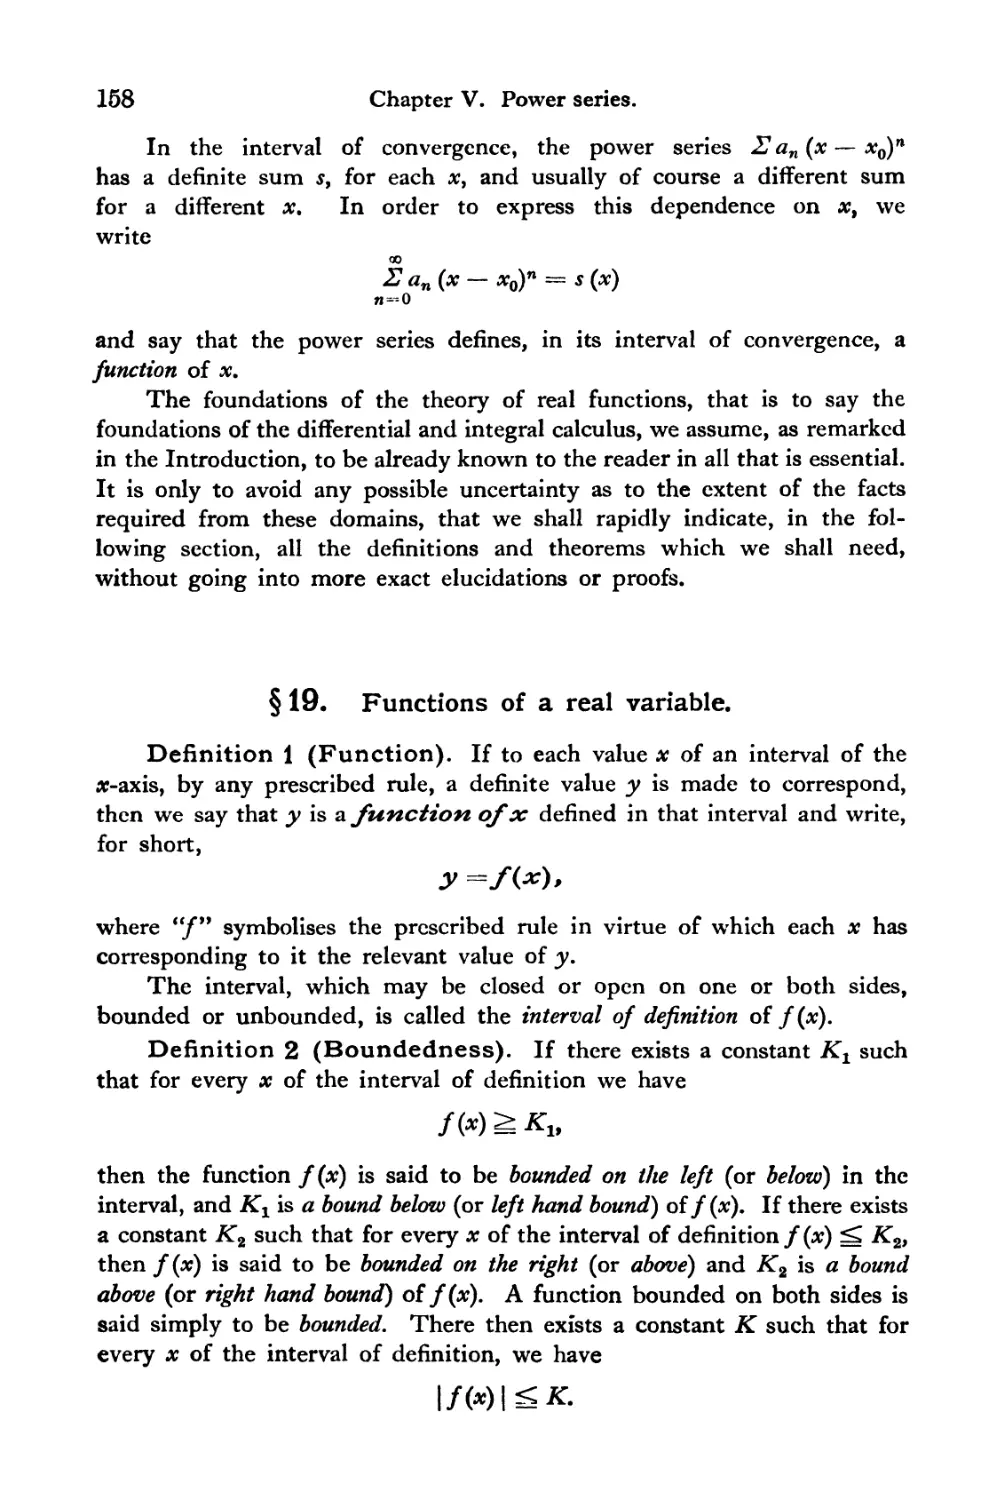 § 19. Functions of a real variable